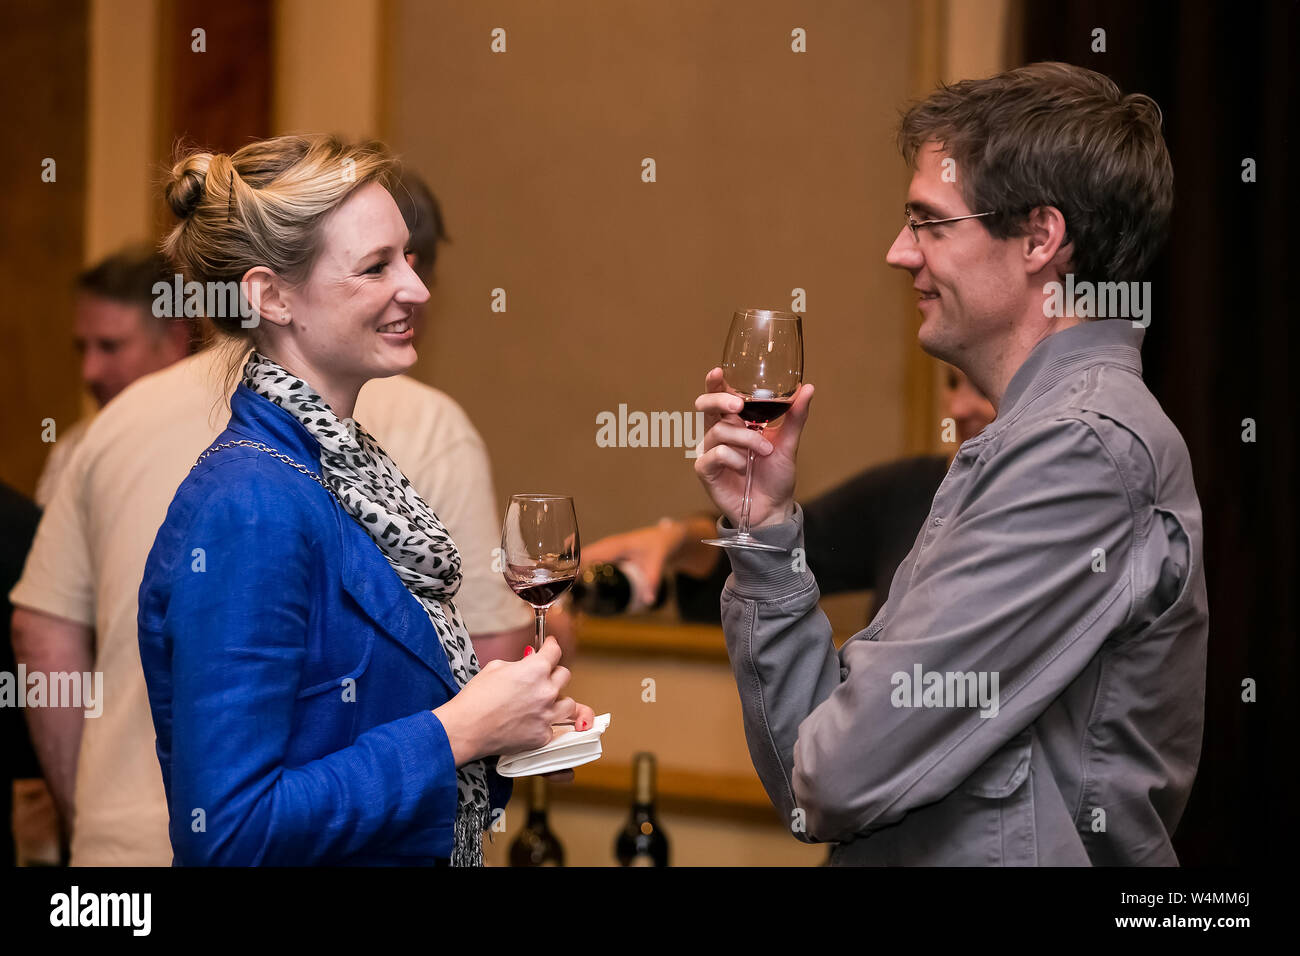 Johannesburg, South Africa - May 10 2013: Sophisticated people sampling wine at a wine tasting event Stock Photo